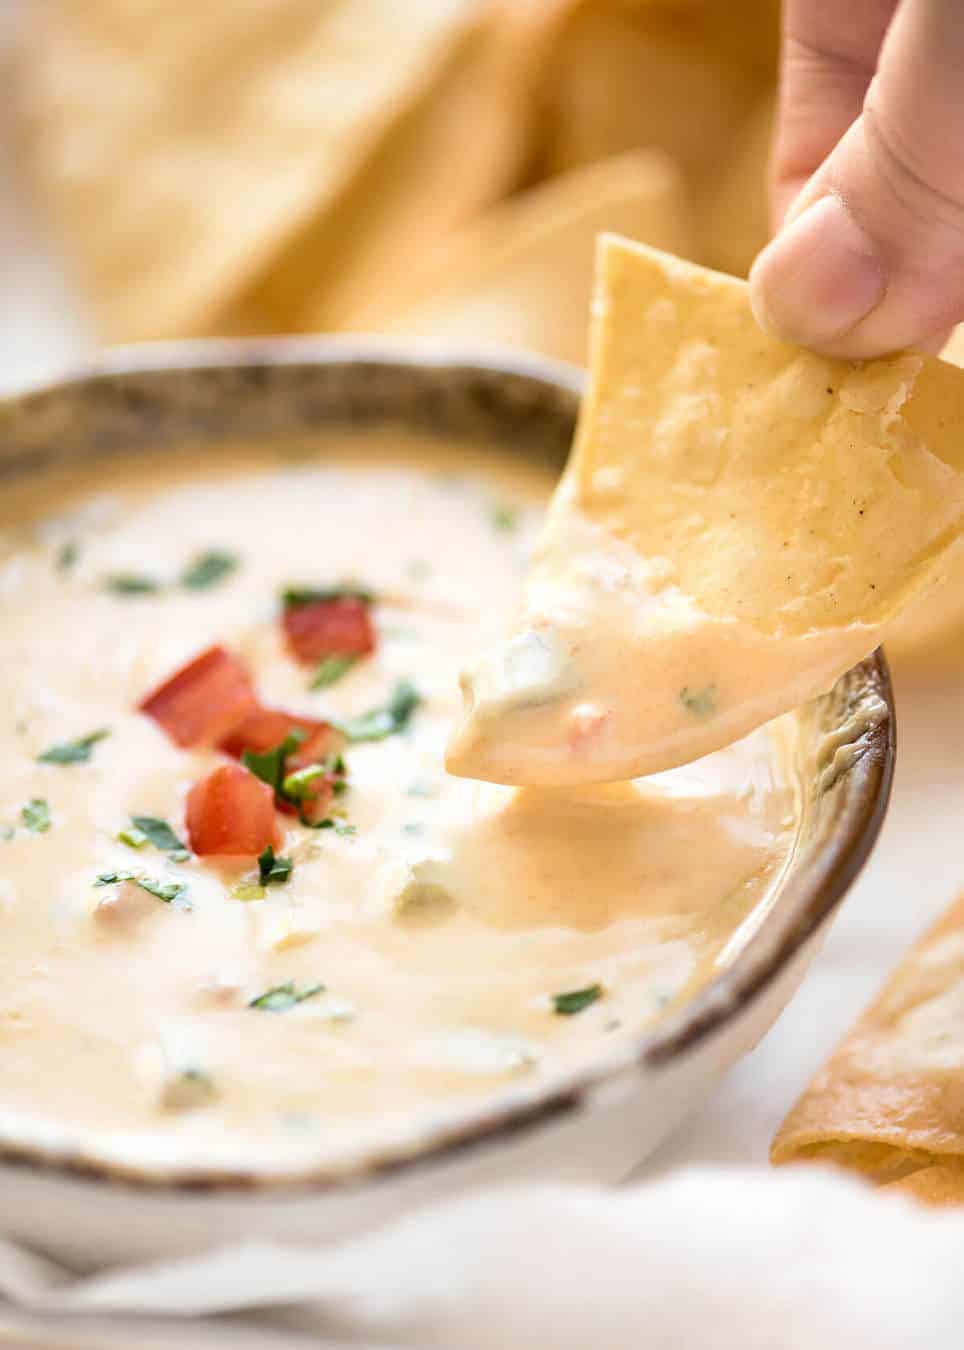 Code cracked: Queso Dip made with real cheese that's ultra silky even when it cools. recipetineats.com